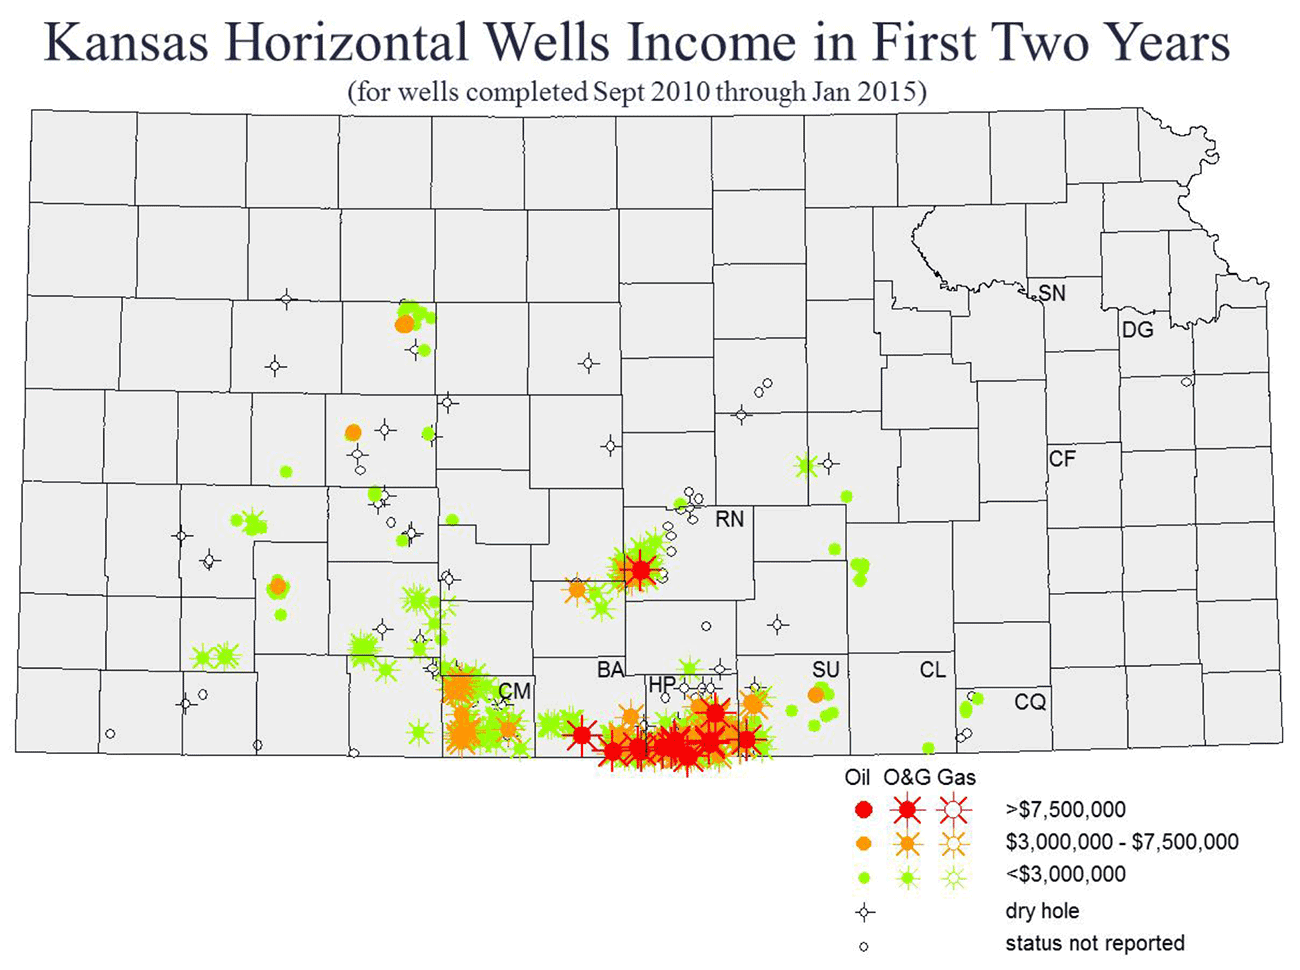 Modern horizontal wells in Kansas. Most horizontal wells in the southern tier of counties in the state are targeting the Mississippian.